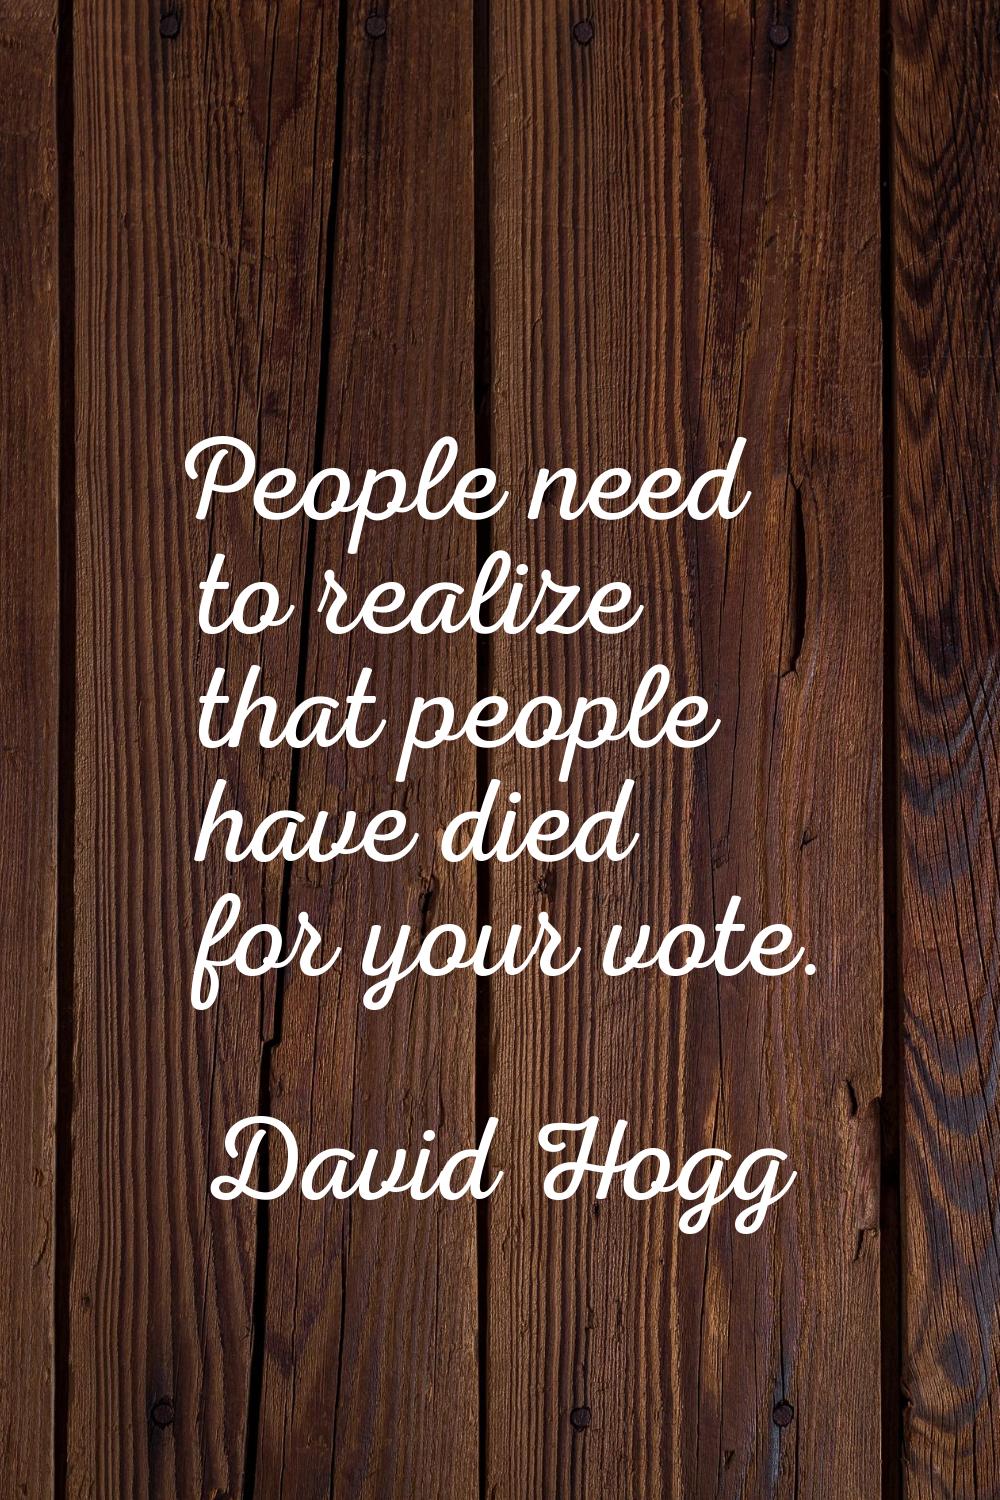 People need to realize that people have died for your vote.